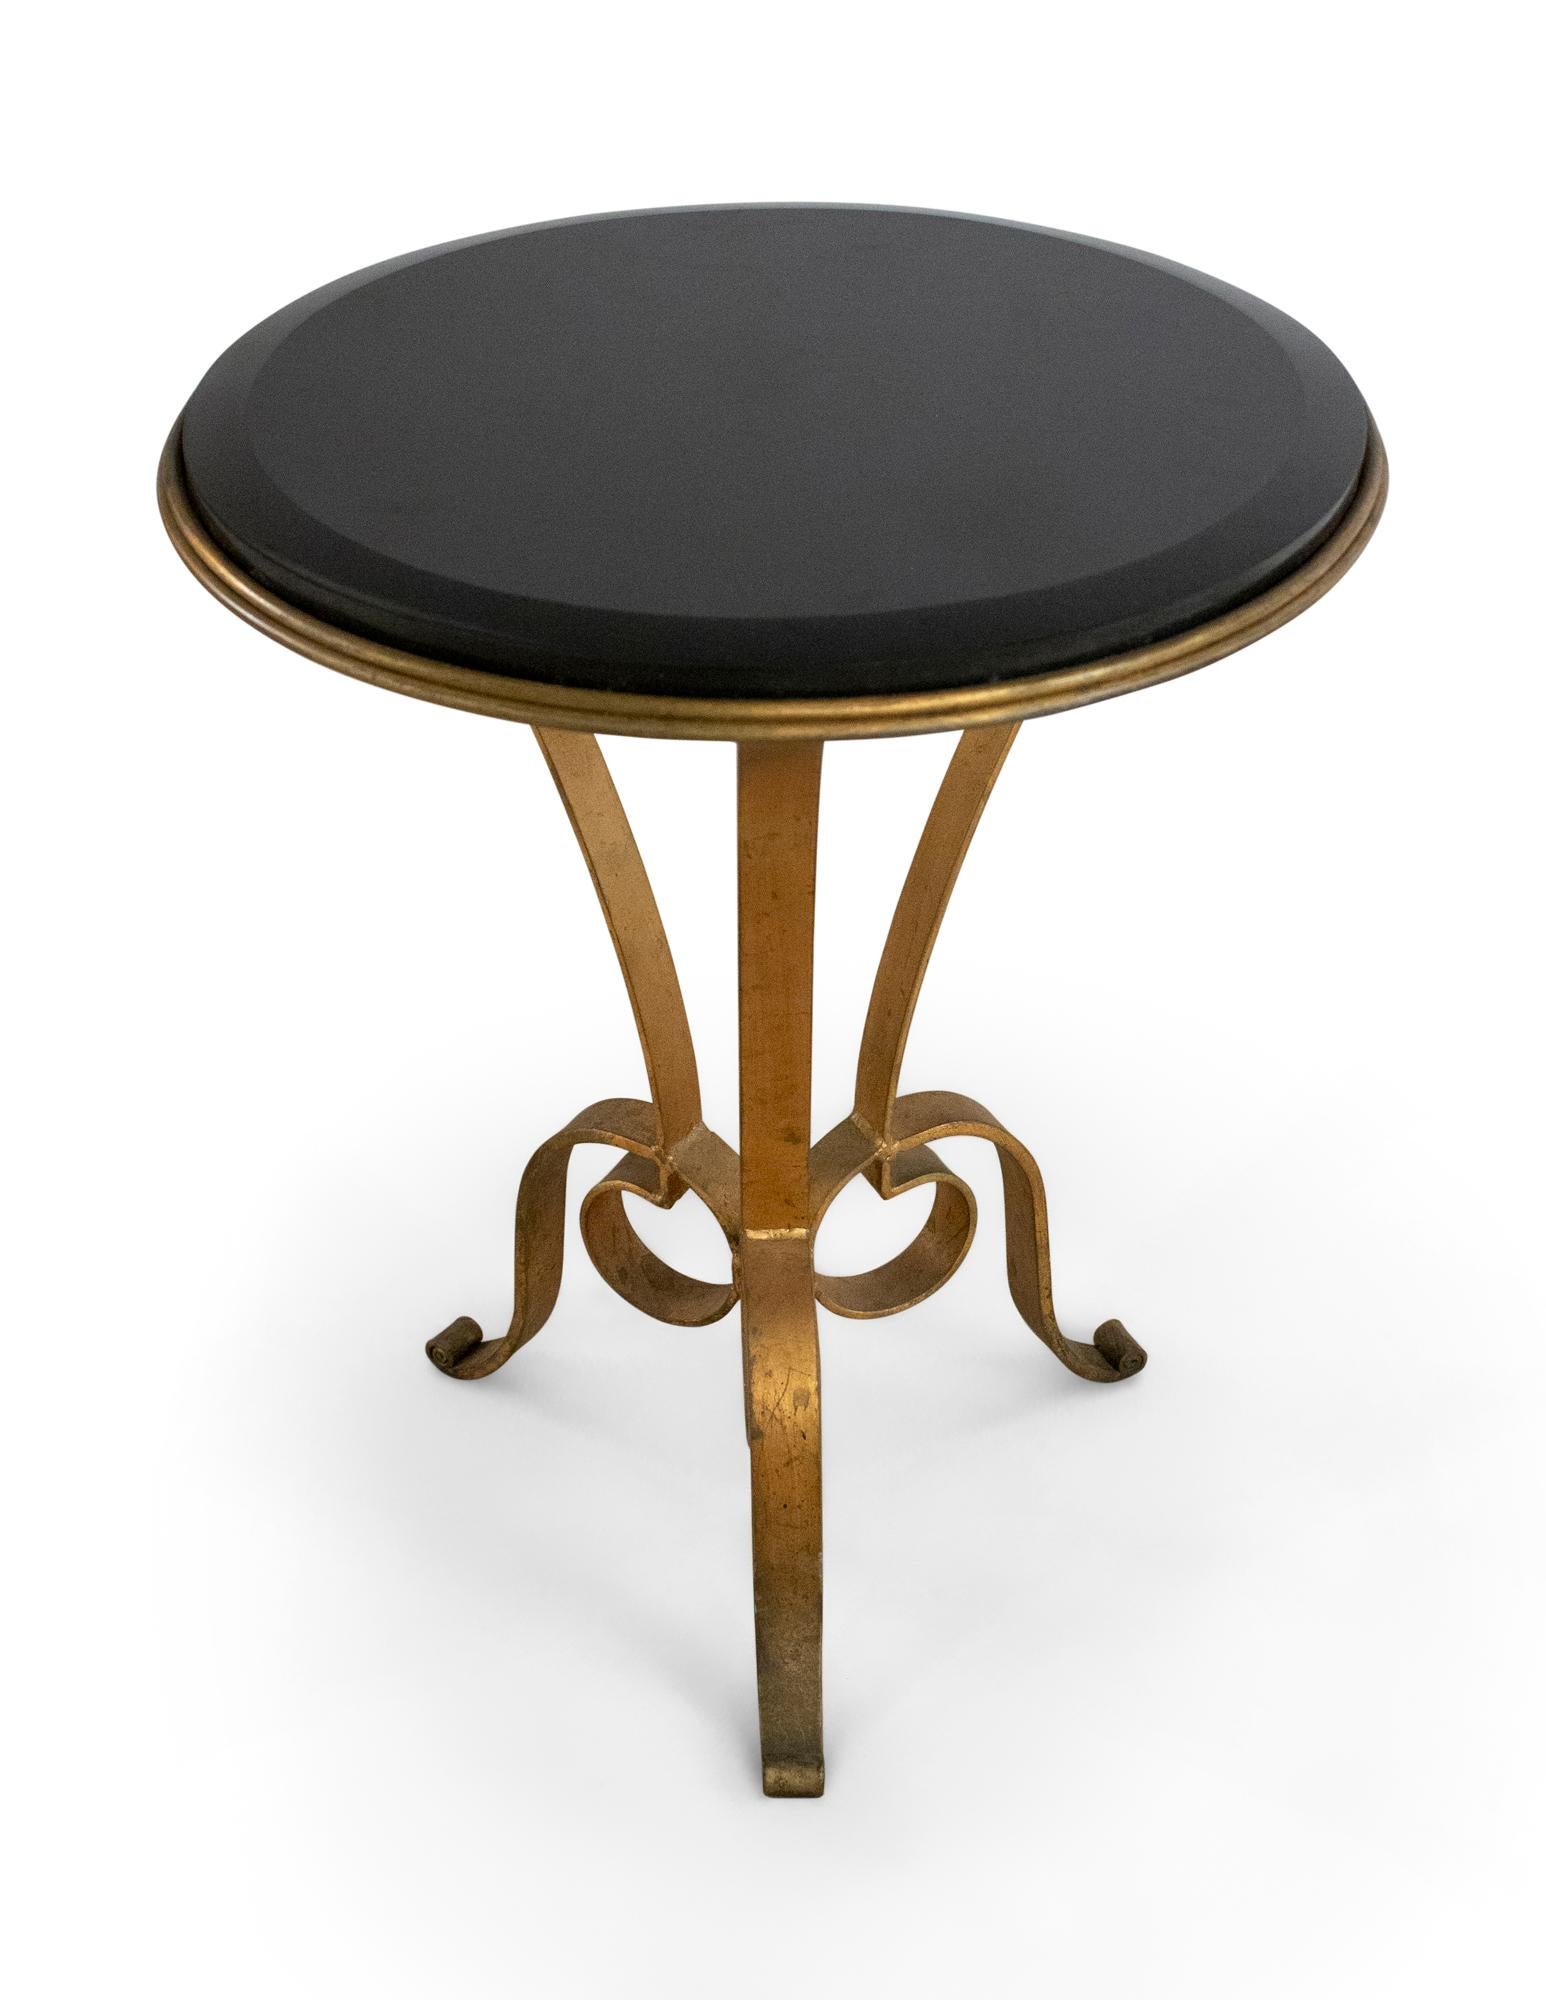 20th Century Pair of French Art Deco Style Gilt Metal and Black Marble Circular Tables